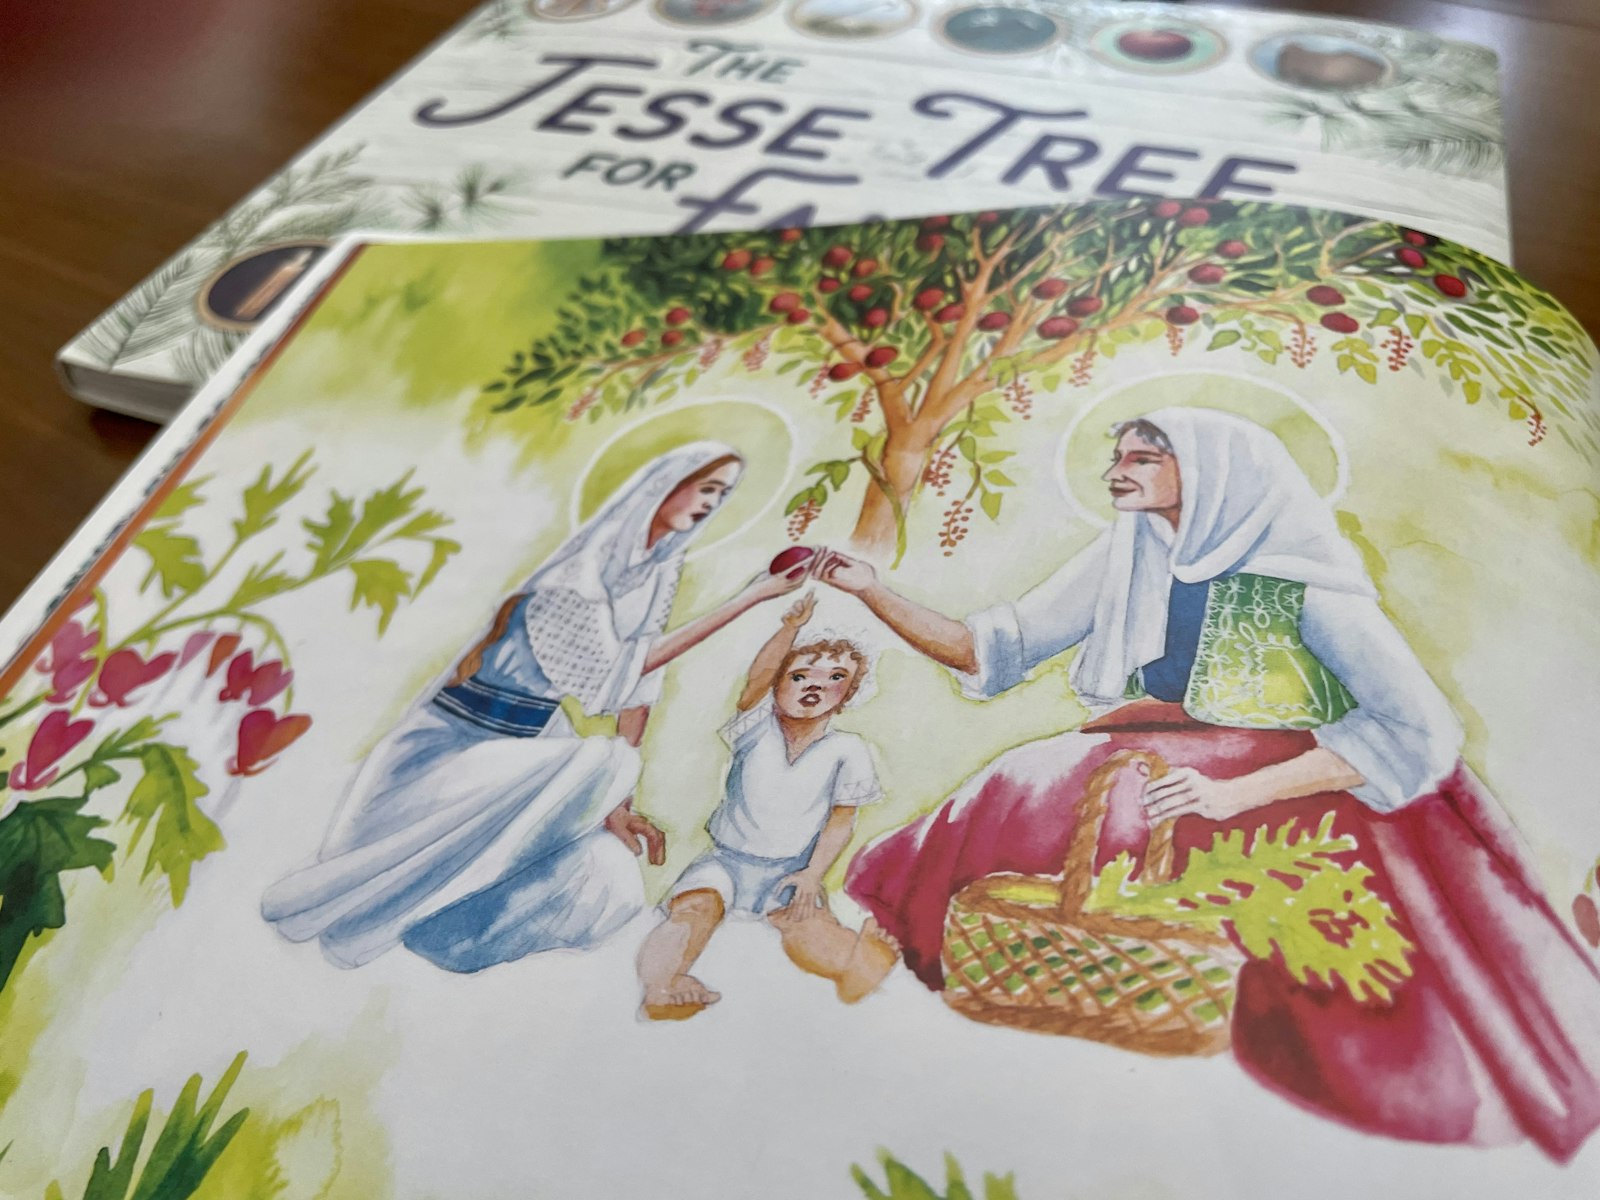 In the "Marian Consecration for Families with Young Children," Pressprich included an illustration of a Jesse Tree behind Mary and Elizabeth. The illustration inspired her to write another book.